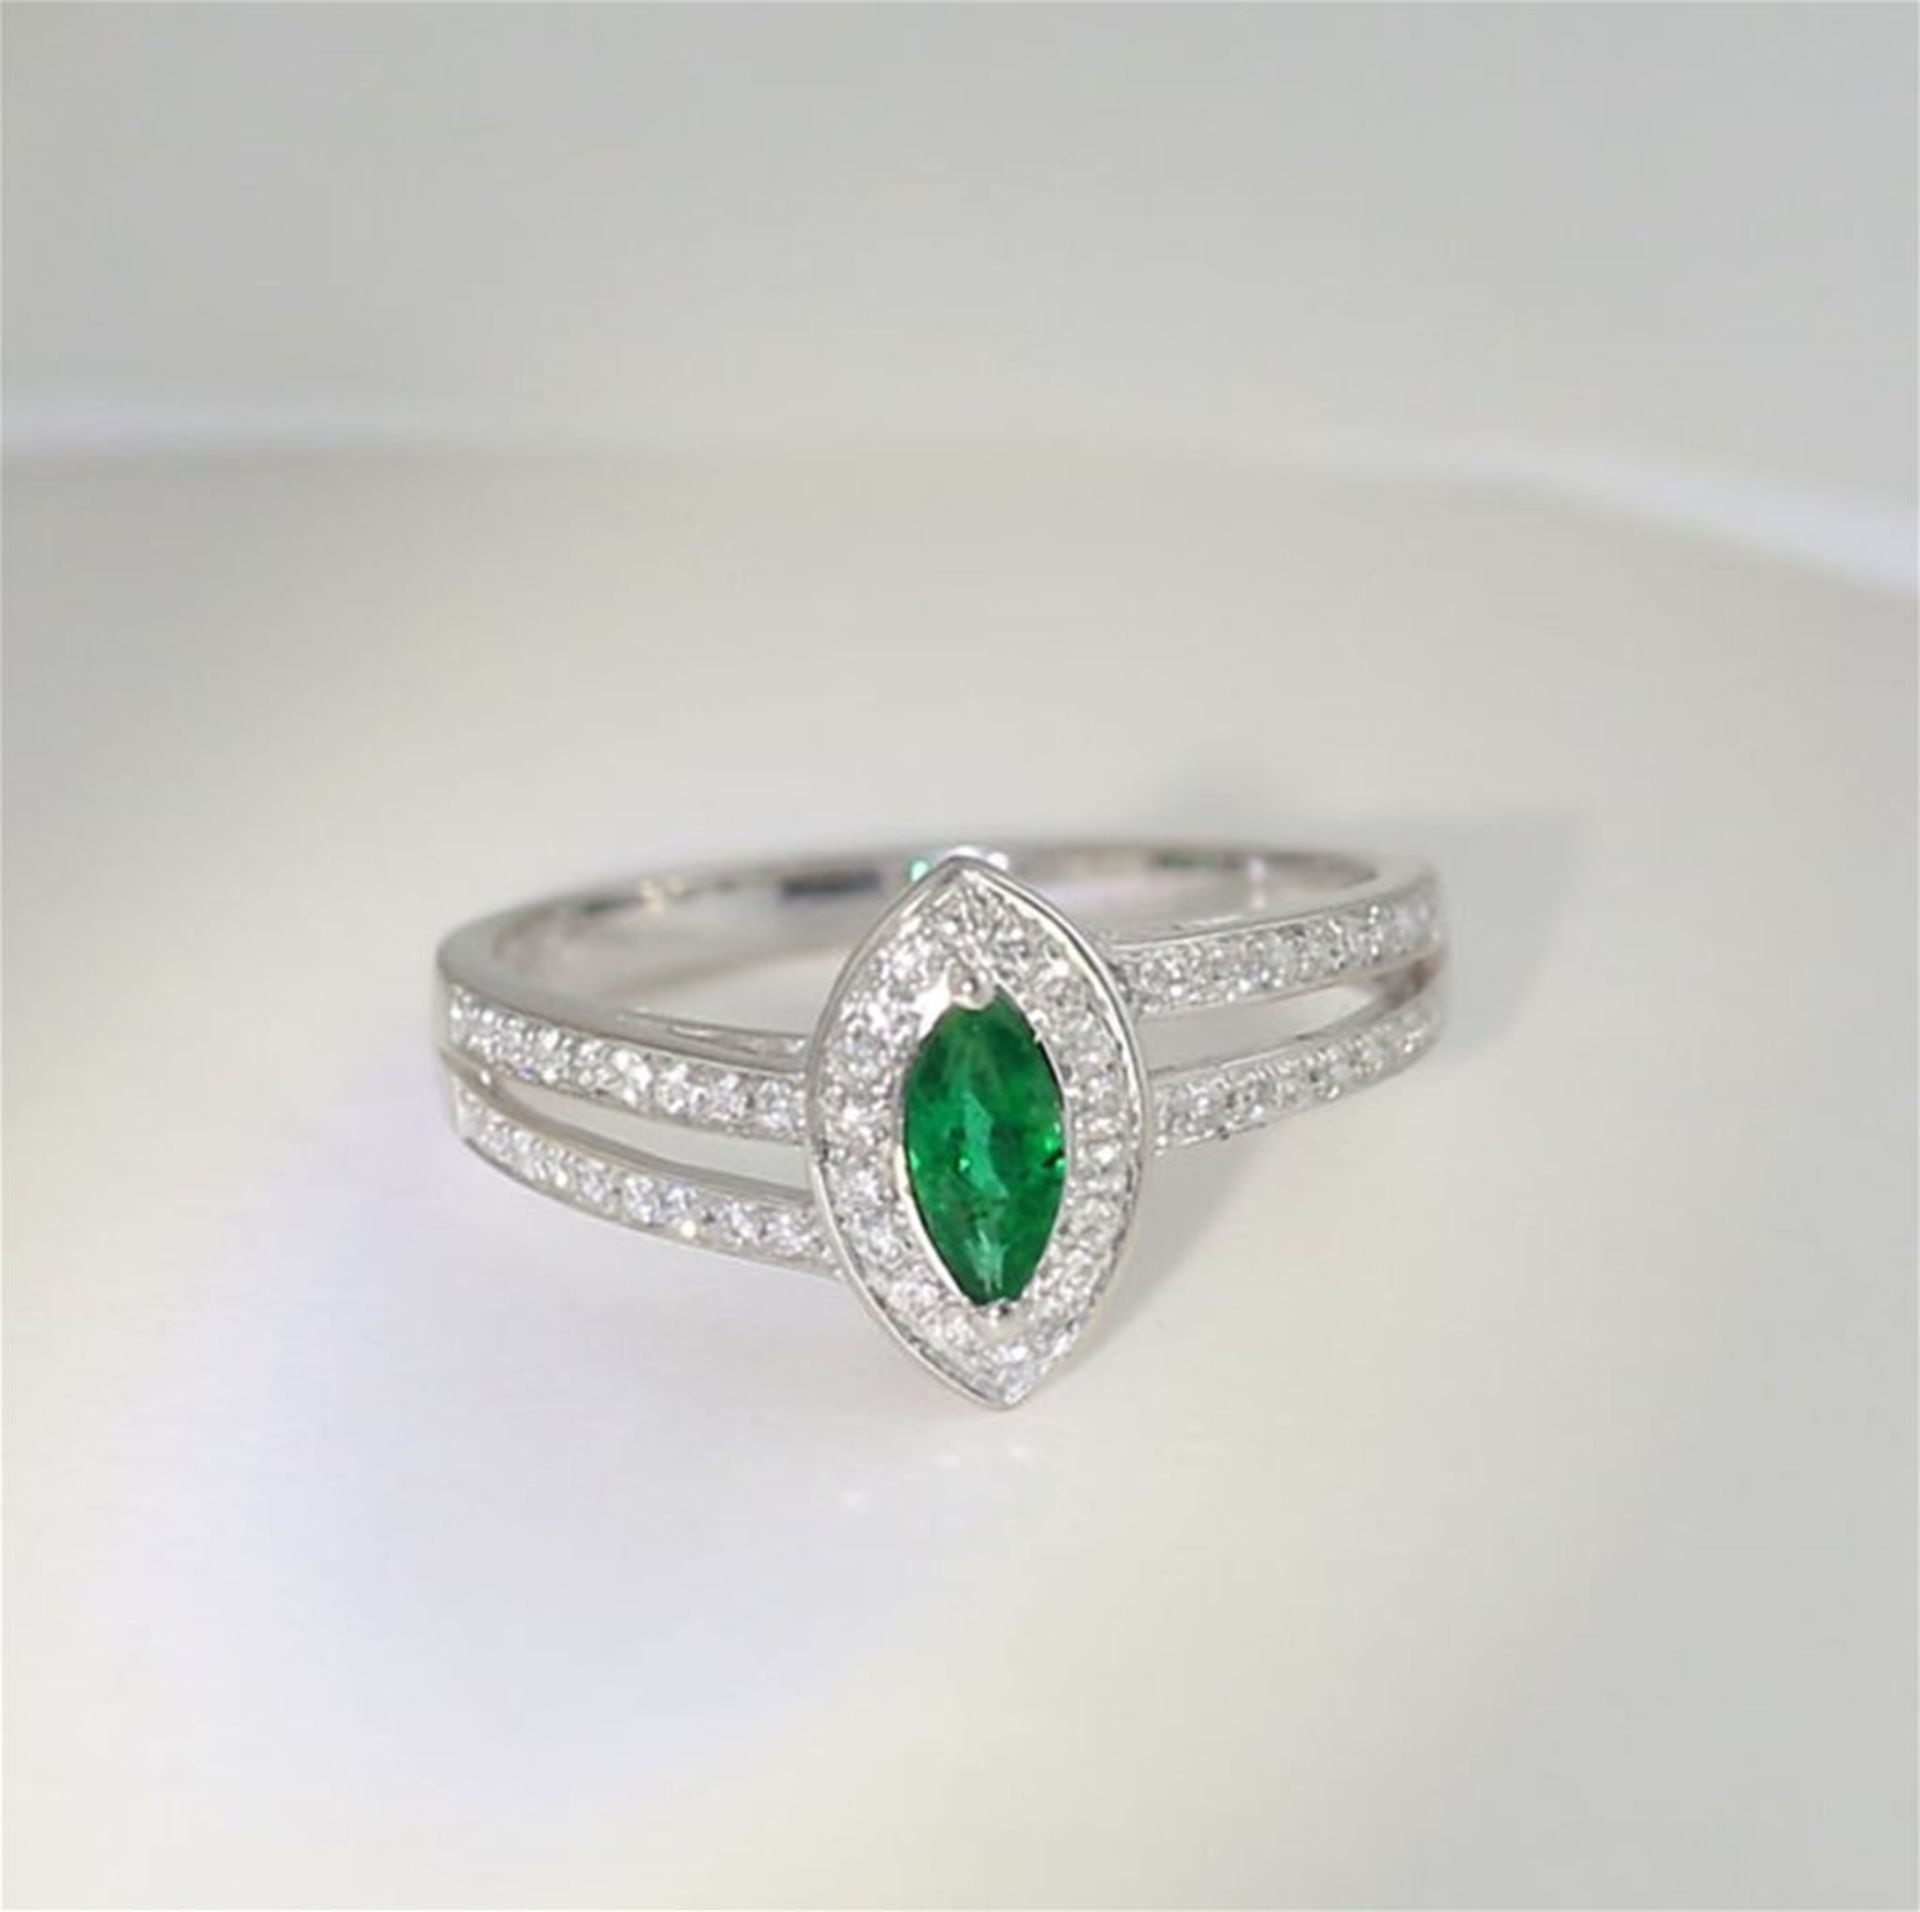 18 K / 750 White Gold Emerald and Diamond Ring